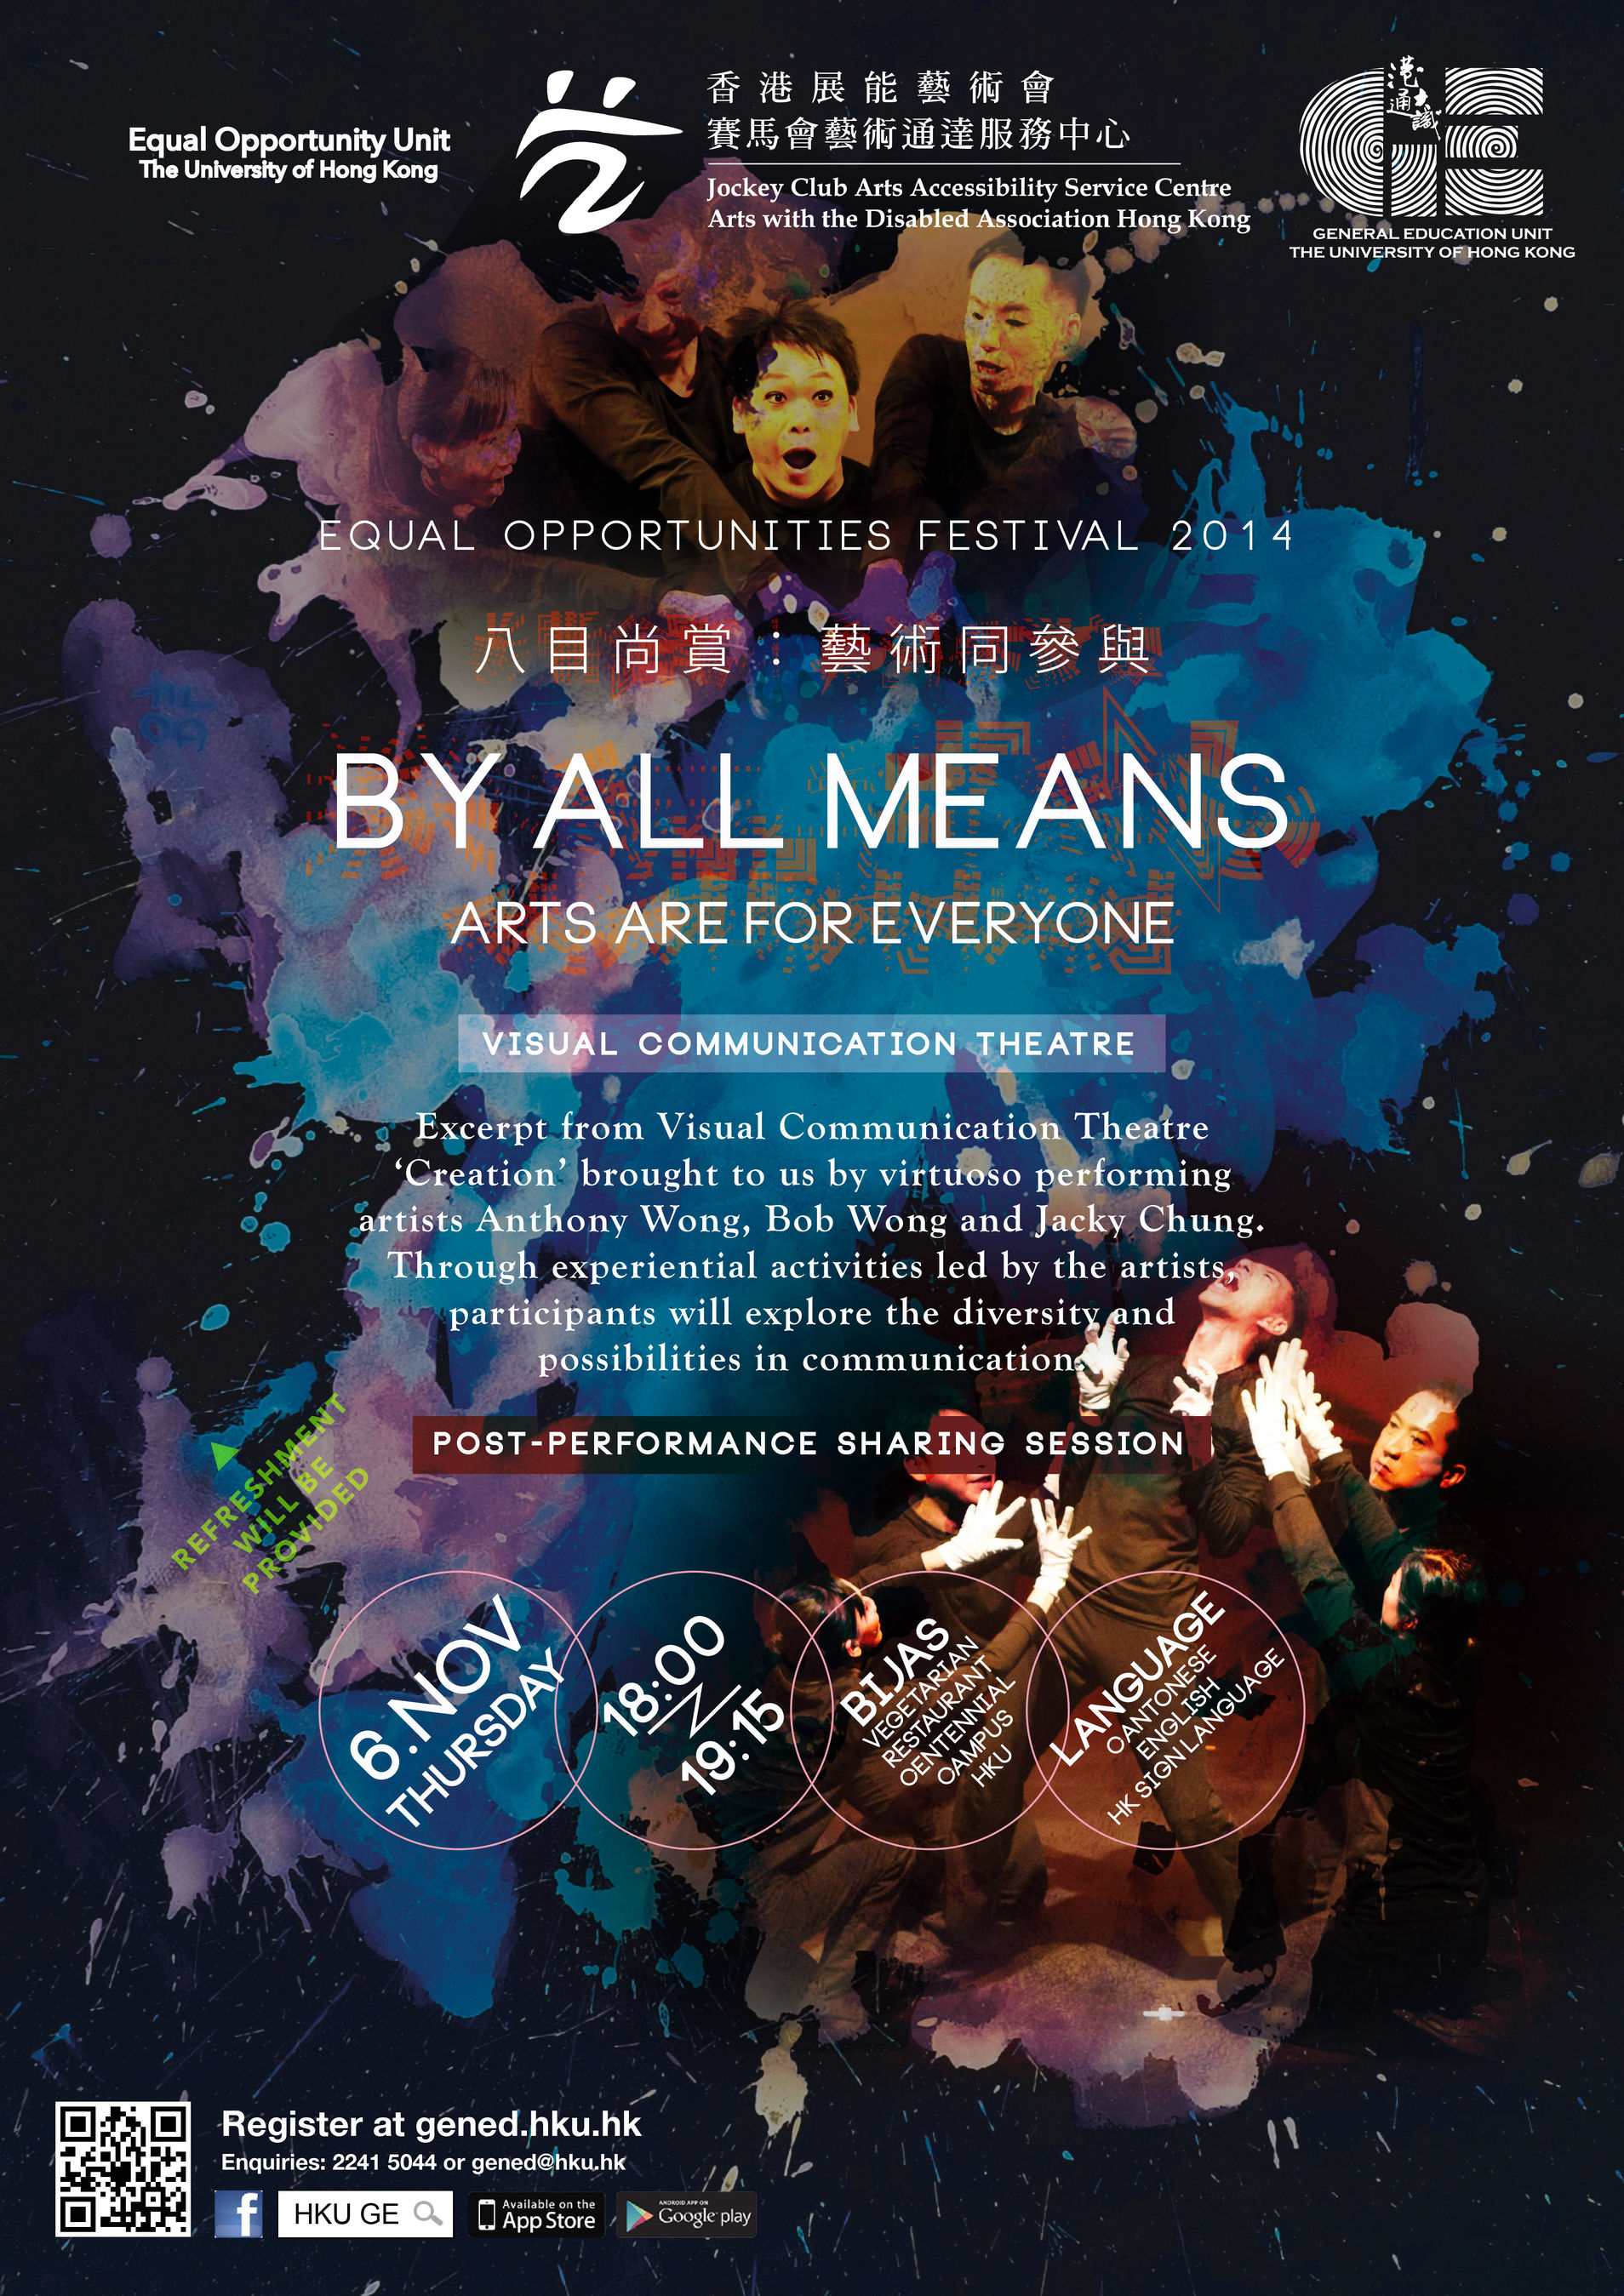 By All Means: Arts are for Everyone - Visual Communication Theatre and Sharing Session  八目尚賞︰藝術同參與 - 視覺溝通劇場及演後談